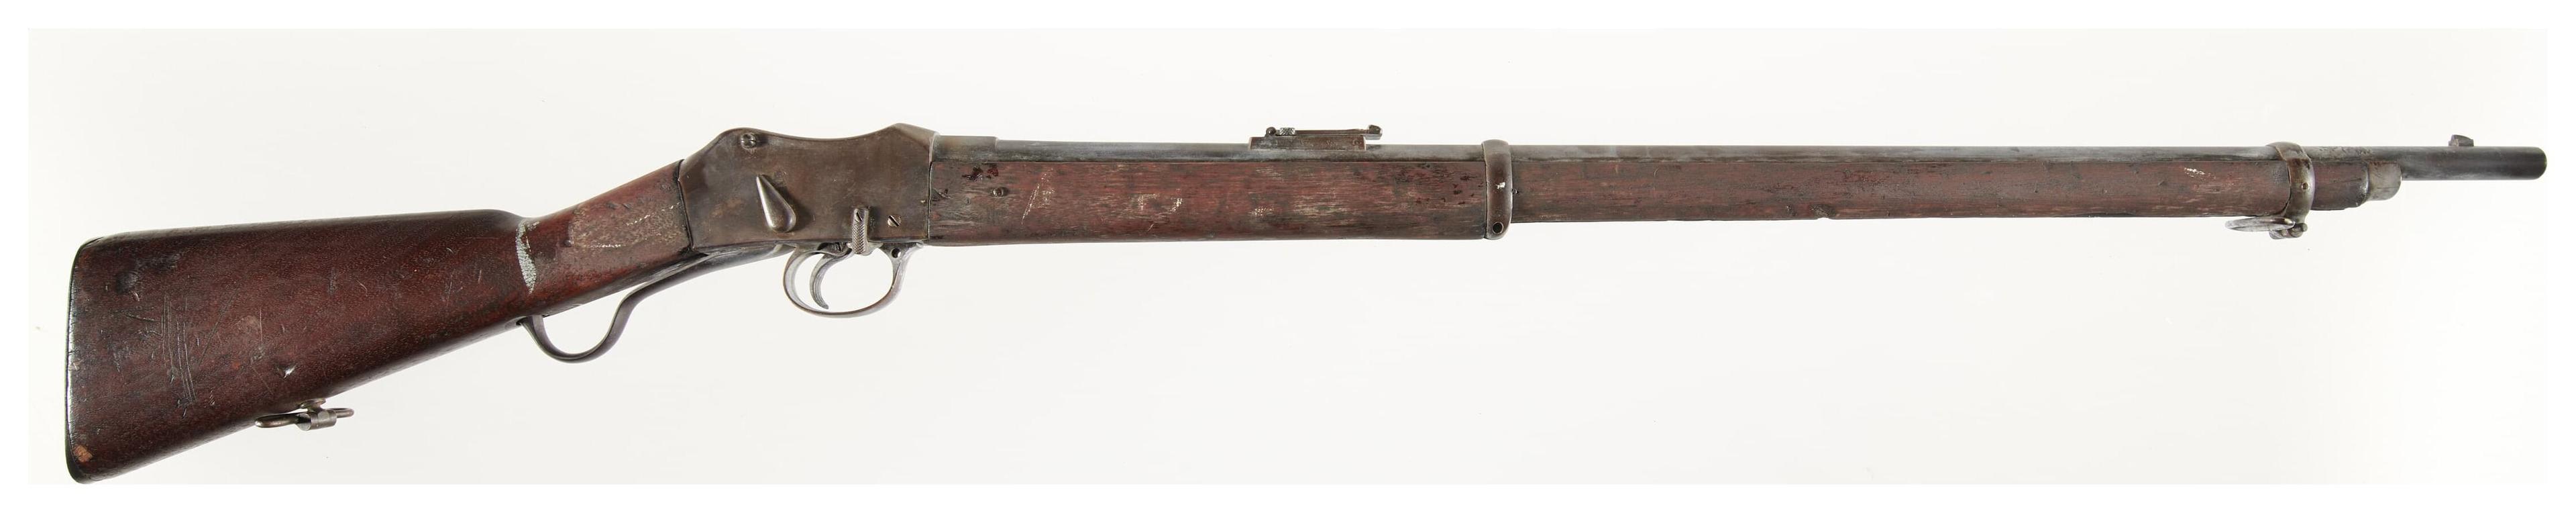 Two Ottoman Contract Providence Tool Co. Peabody-Martini Rifles